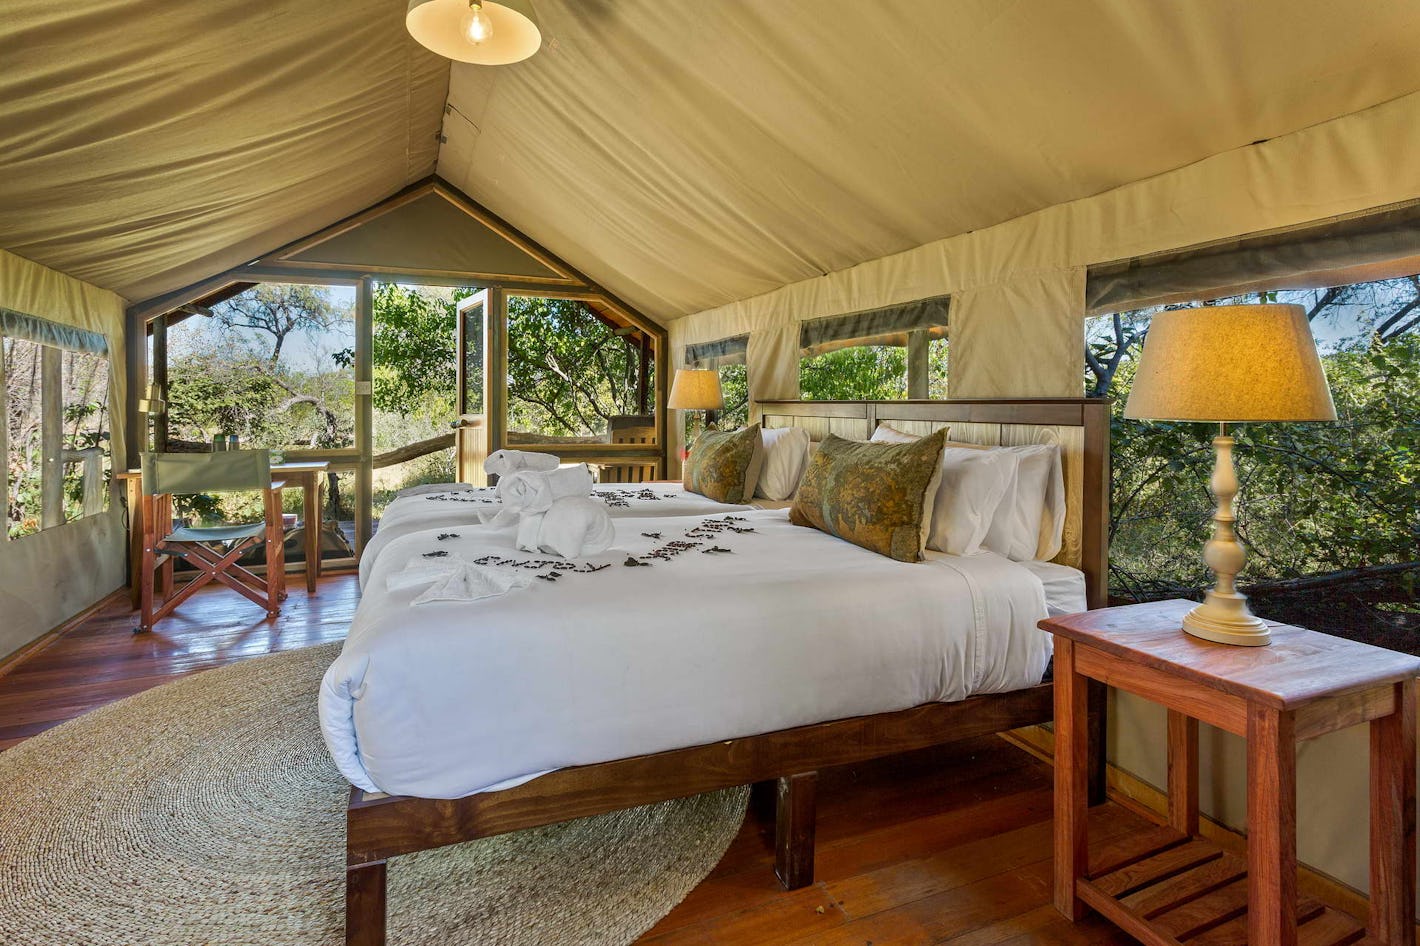 Saguni Safari Lodge is situated in Moremi East in the Okavango Delta. It is nestled in an island of mature riparian trees, typical of the Okavango Delta. The Lodge overlooks the ‘Mbudi Lagoon’, in the beautiful game-rich area of Khwai. The name...